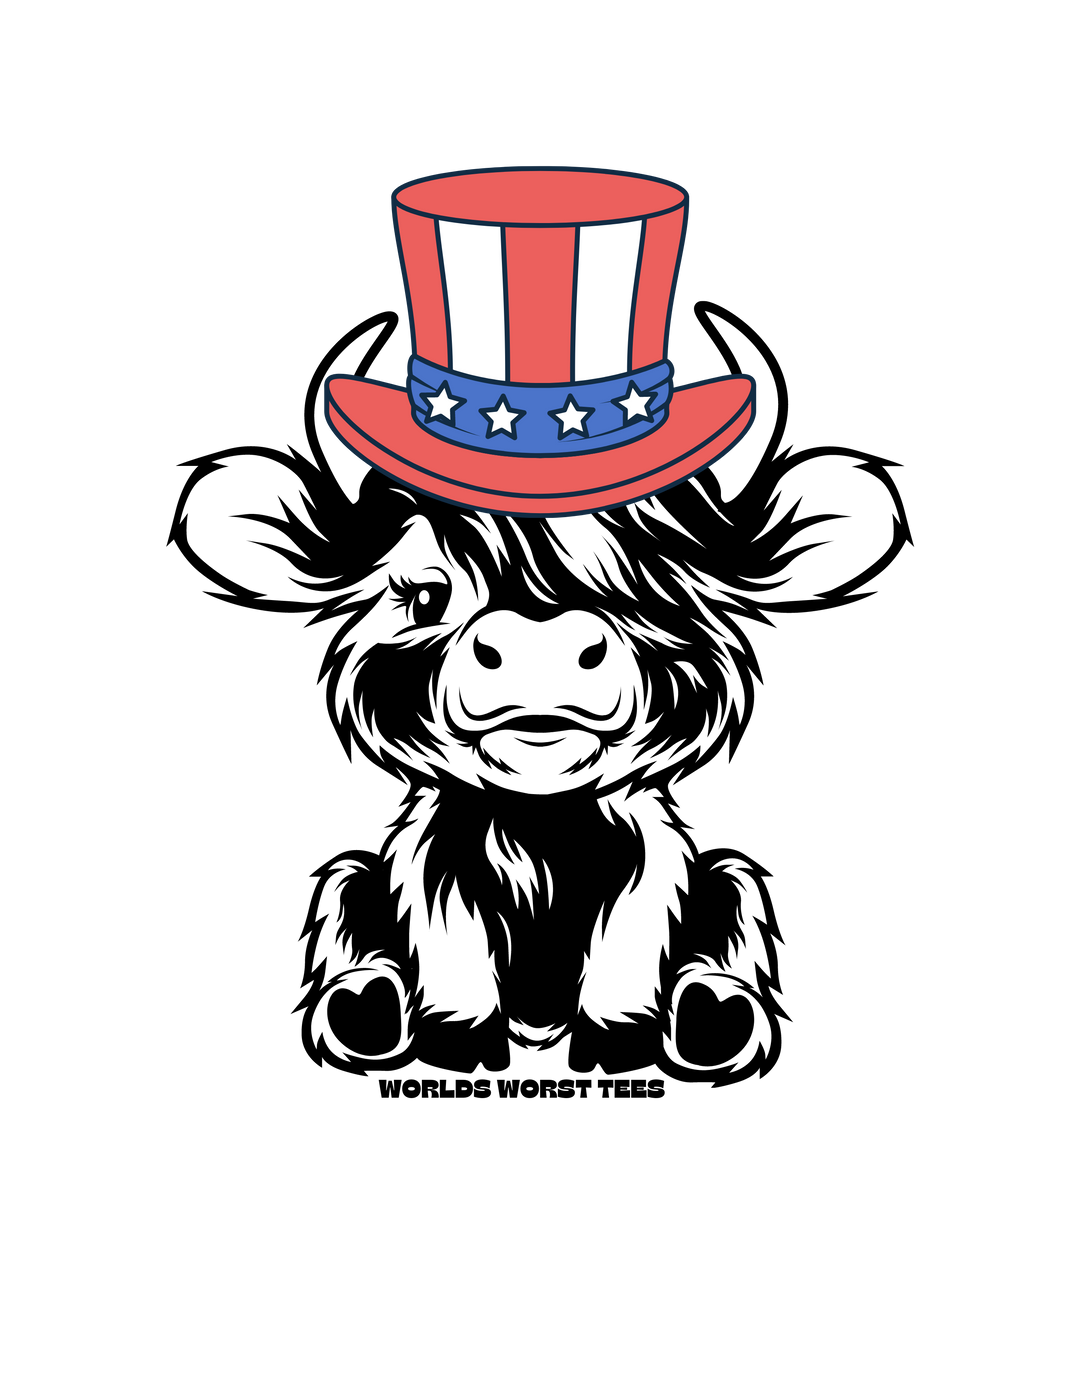 A kids tee featuring a red, white, and blue hat design with stars and stripes. Made of 100% cotton, light fabric, and a classic fit. Ideal for everyday wear.